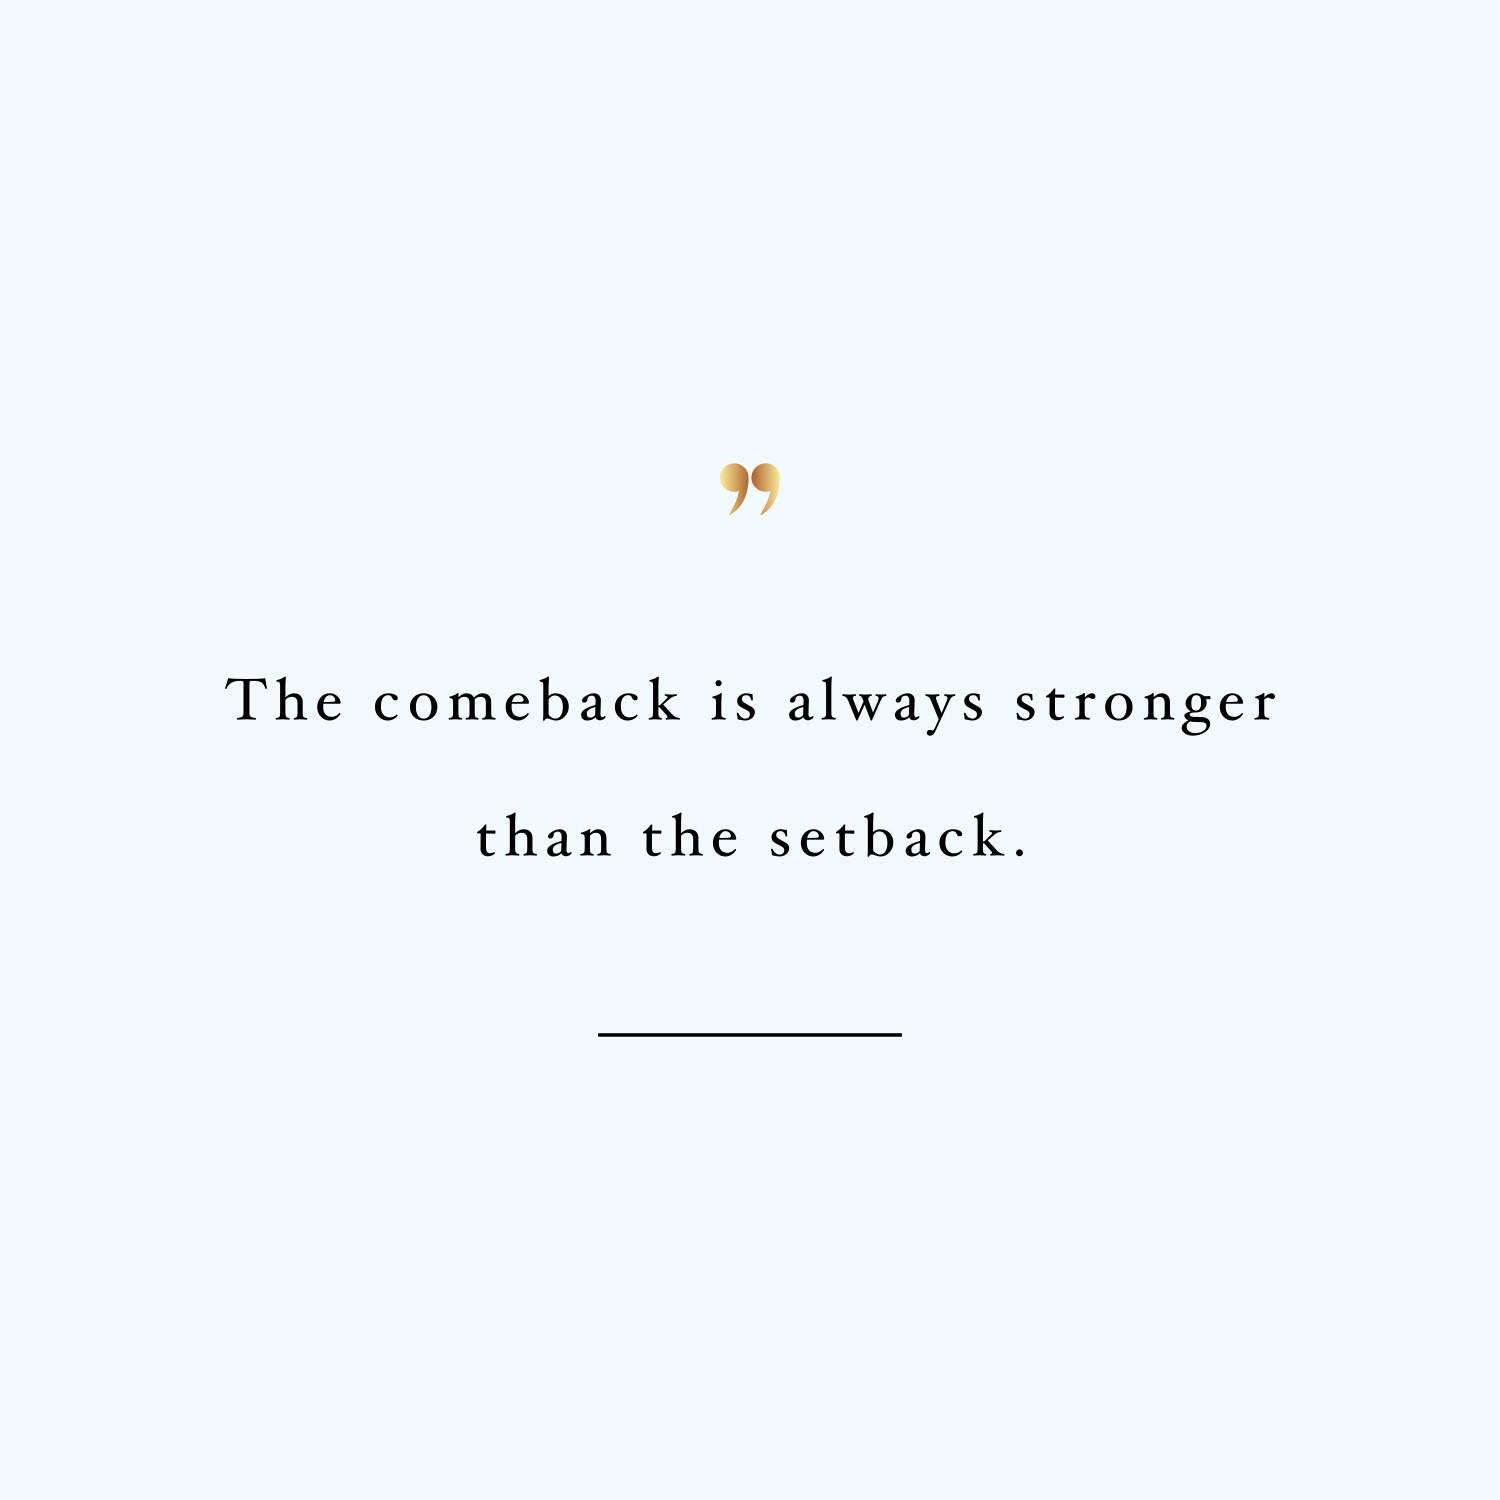 The comeback! Browse our collection of motivational exercise and healthy eating quotes and get instant weight loss and fitness inspiration. Stay focused and get fit, healthy and happy! https://www.spotebi.com/workout-motivation/the-comeback/